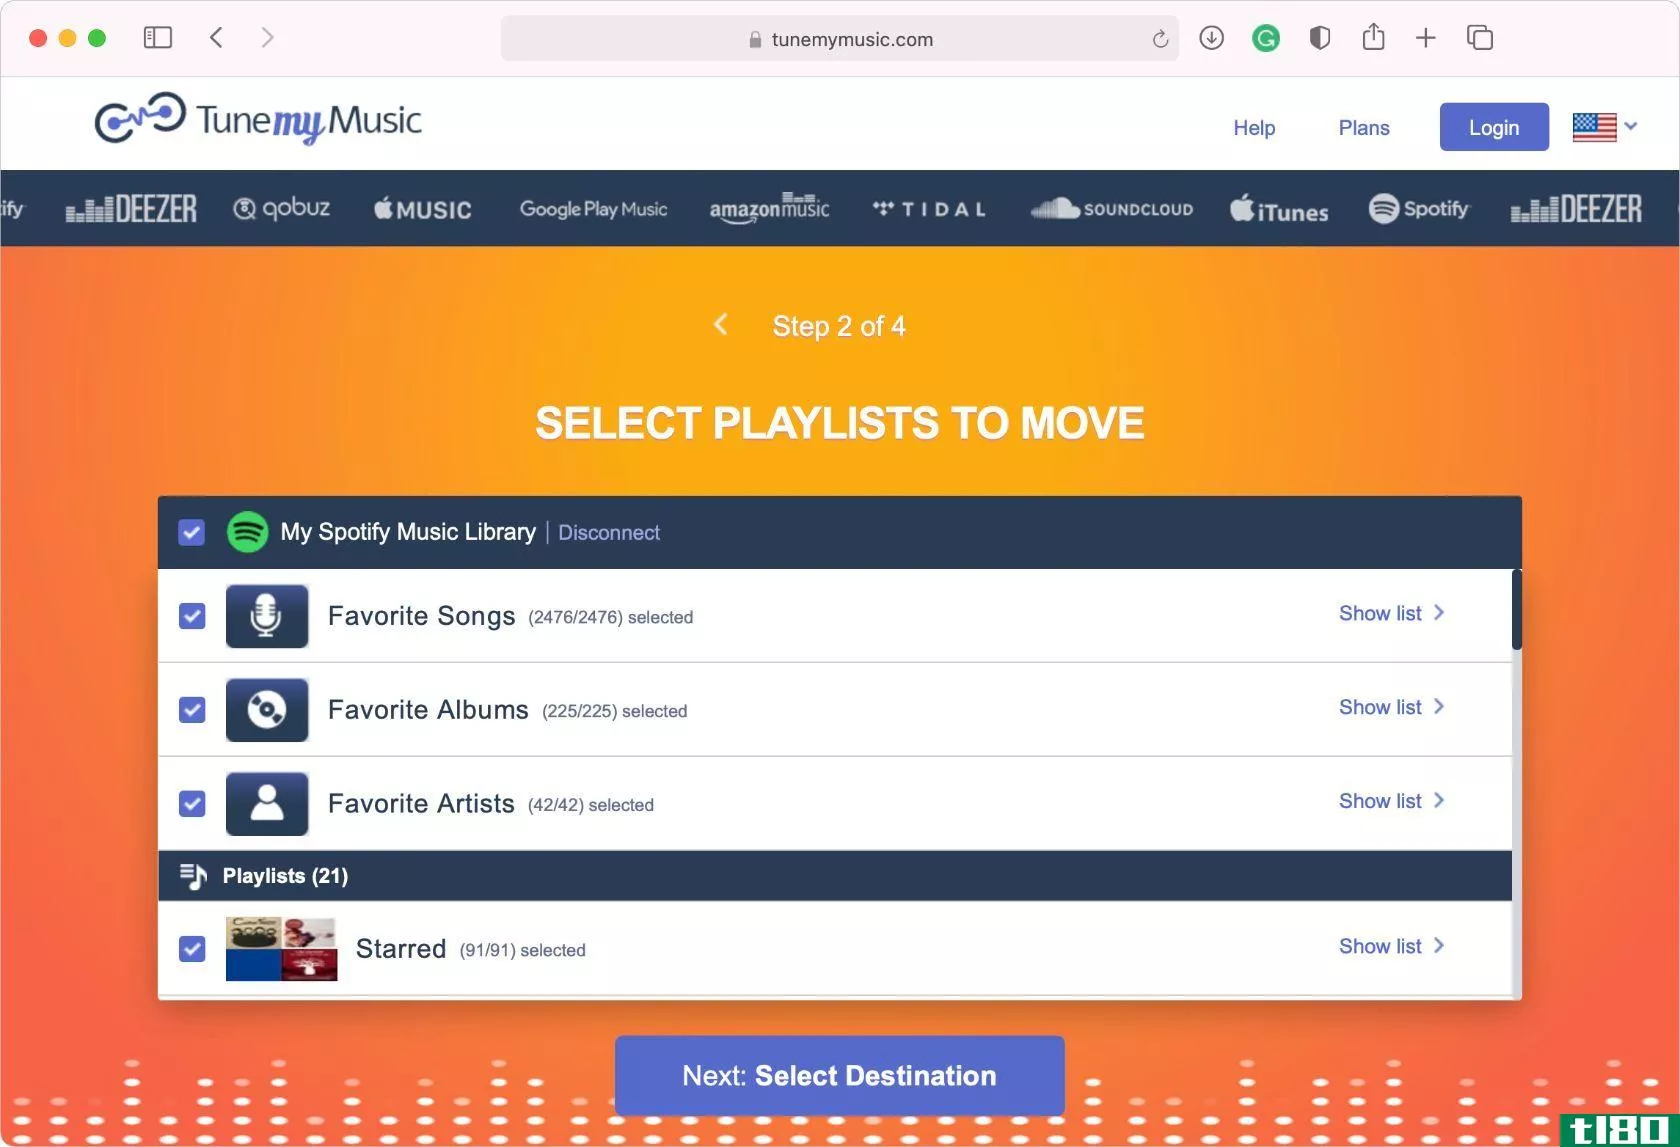 TuneMyMusic showing Spotify music library